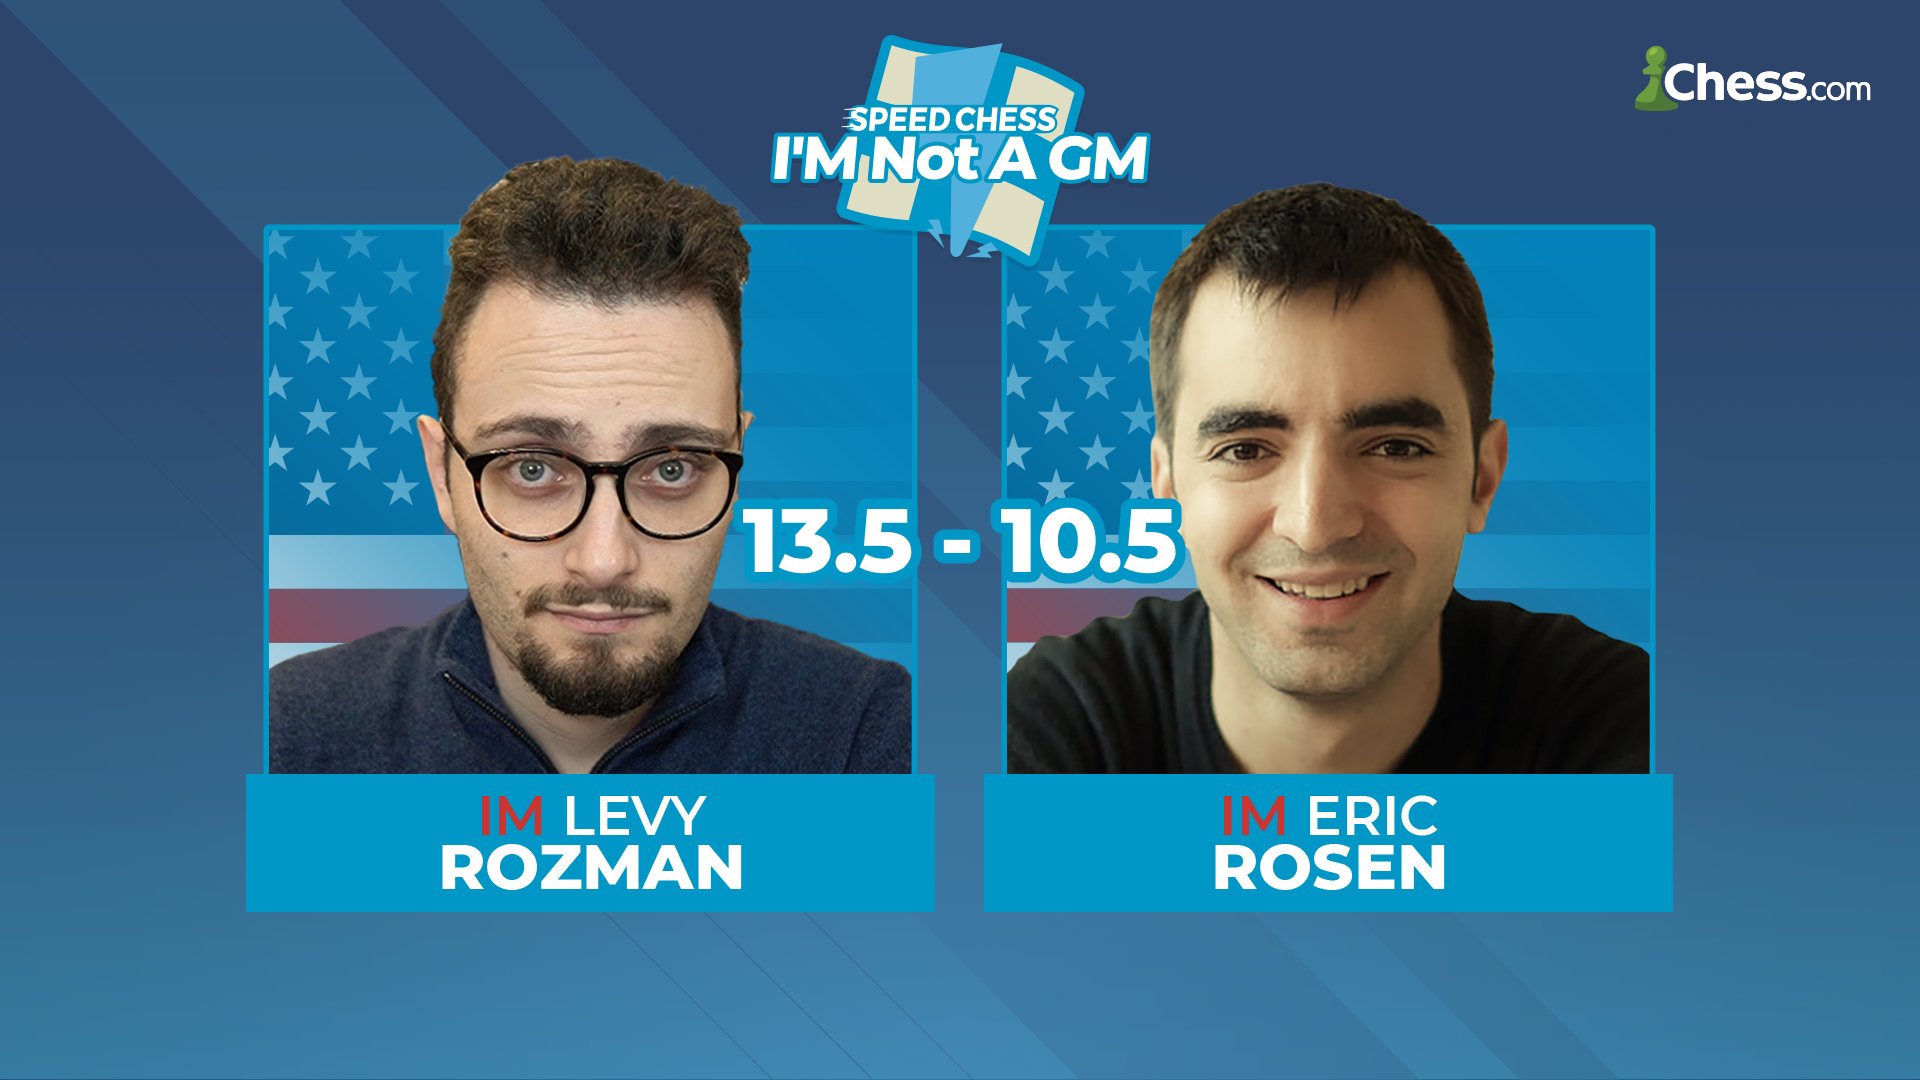 on Twitter: "Congratulations to @GothamChess for winning an insanely tight match against @IM_Rosen in tiebreaks! Levy Rozman advances the Semifinals of the IMSCC he will face @GregShahade https://t.co/kNeubdwfM9" /